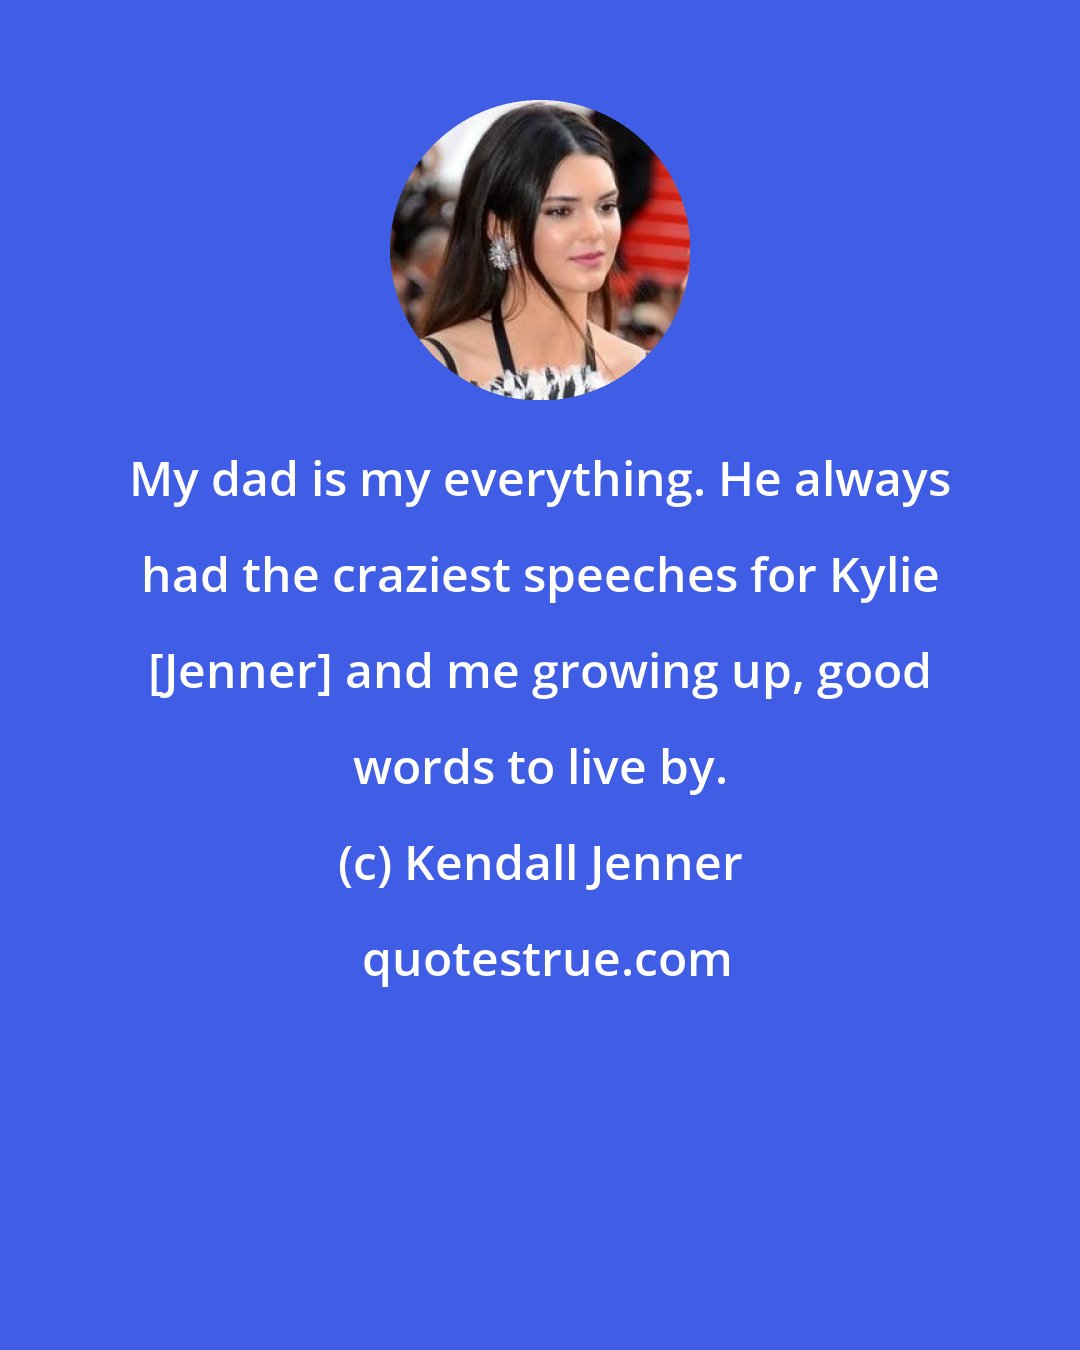 Kendall Jenner: My dad is my everything. He always had the craziest speeches for Kylie [Jenner] and me growing up, good words to live by.